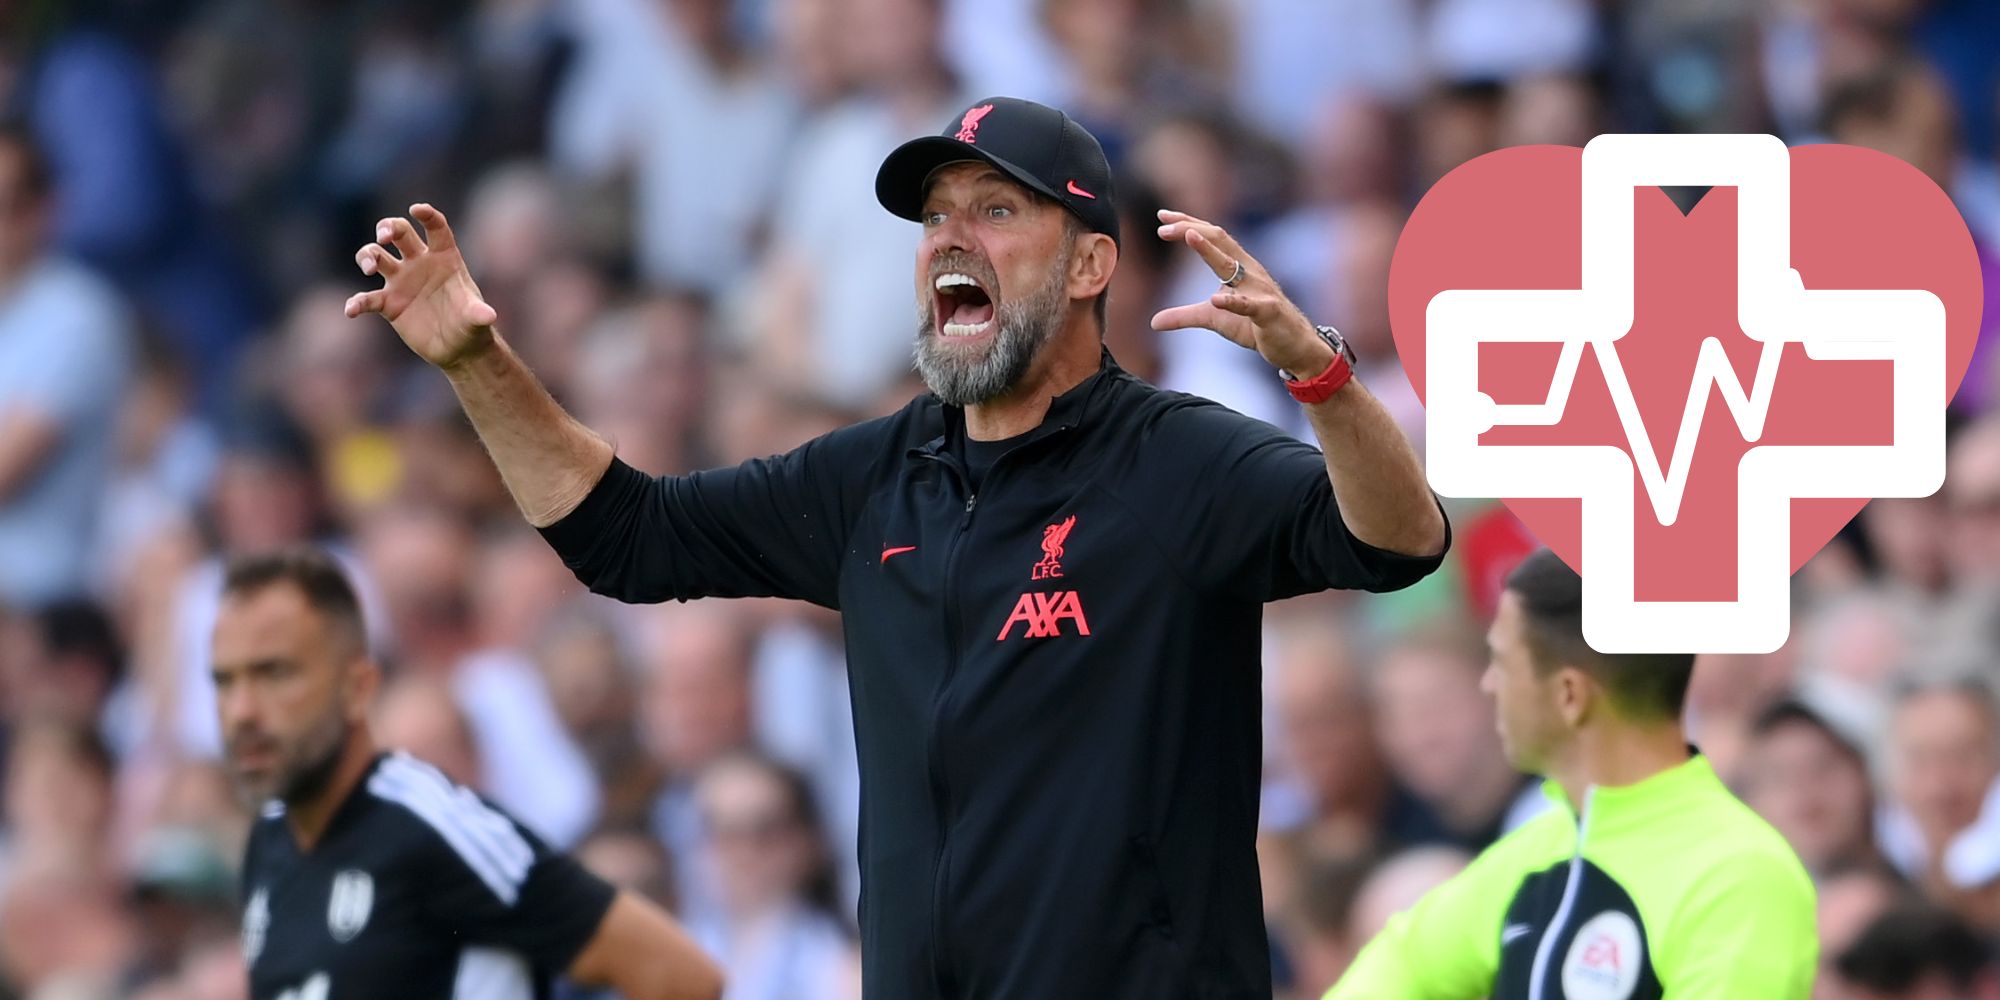 Liverpool hit with two new injury concerns as £29m star now ‘absent as a precaution’ – James Pearce